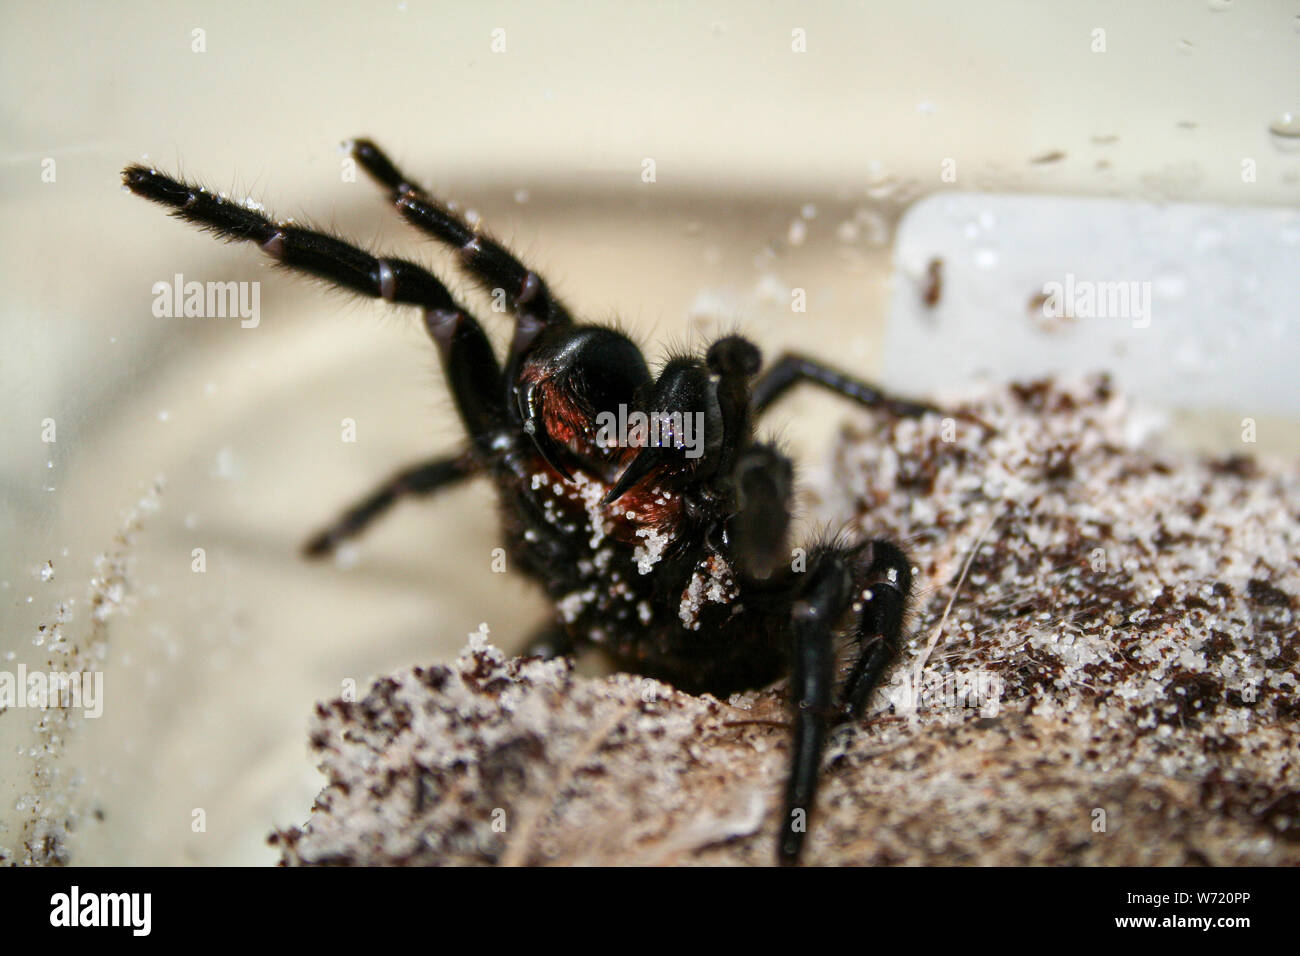 Sydney Funnelweb Spider rearing up and showing fangs Stock Photo